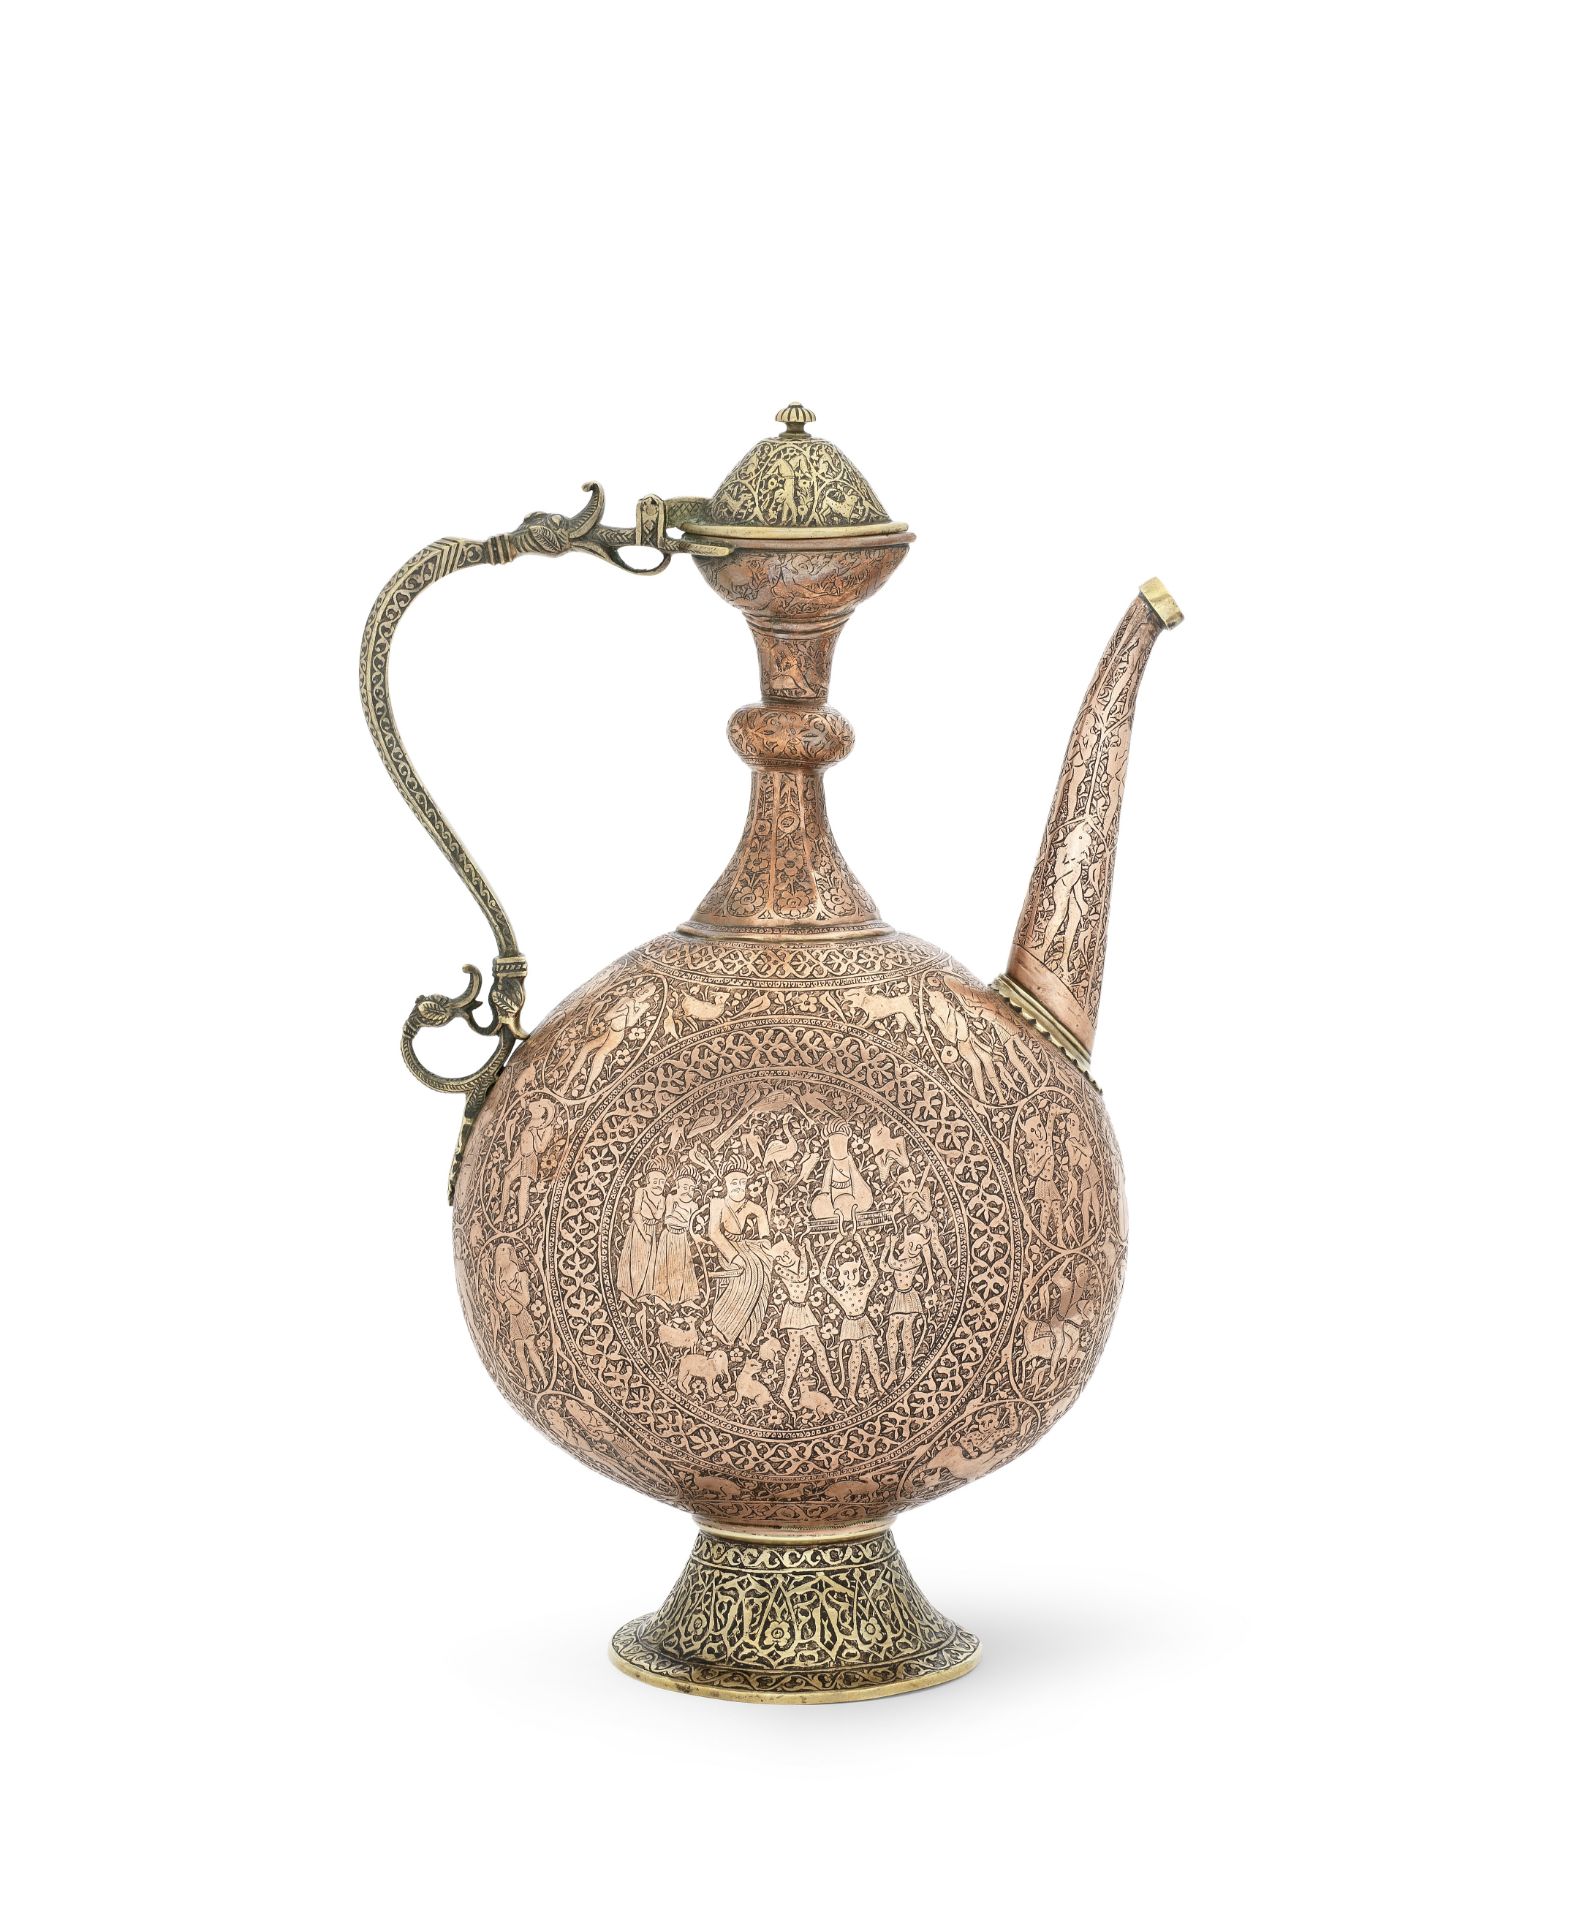 A Qajar brass and copper ewer depicting the prophet Suleyman (Solomon) Persia, 19th Century